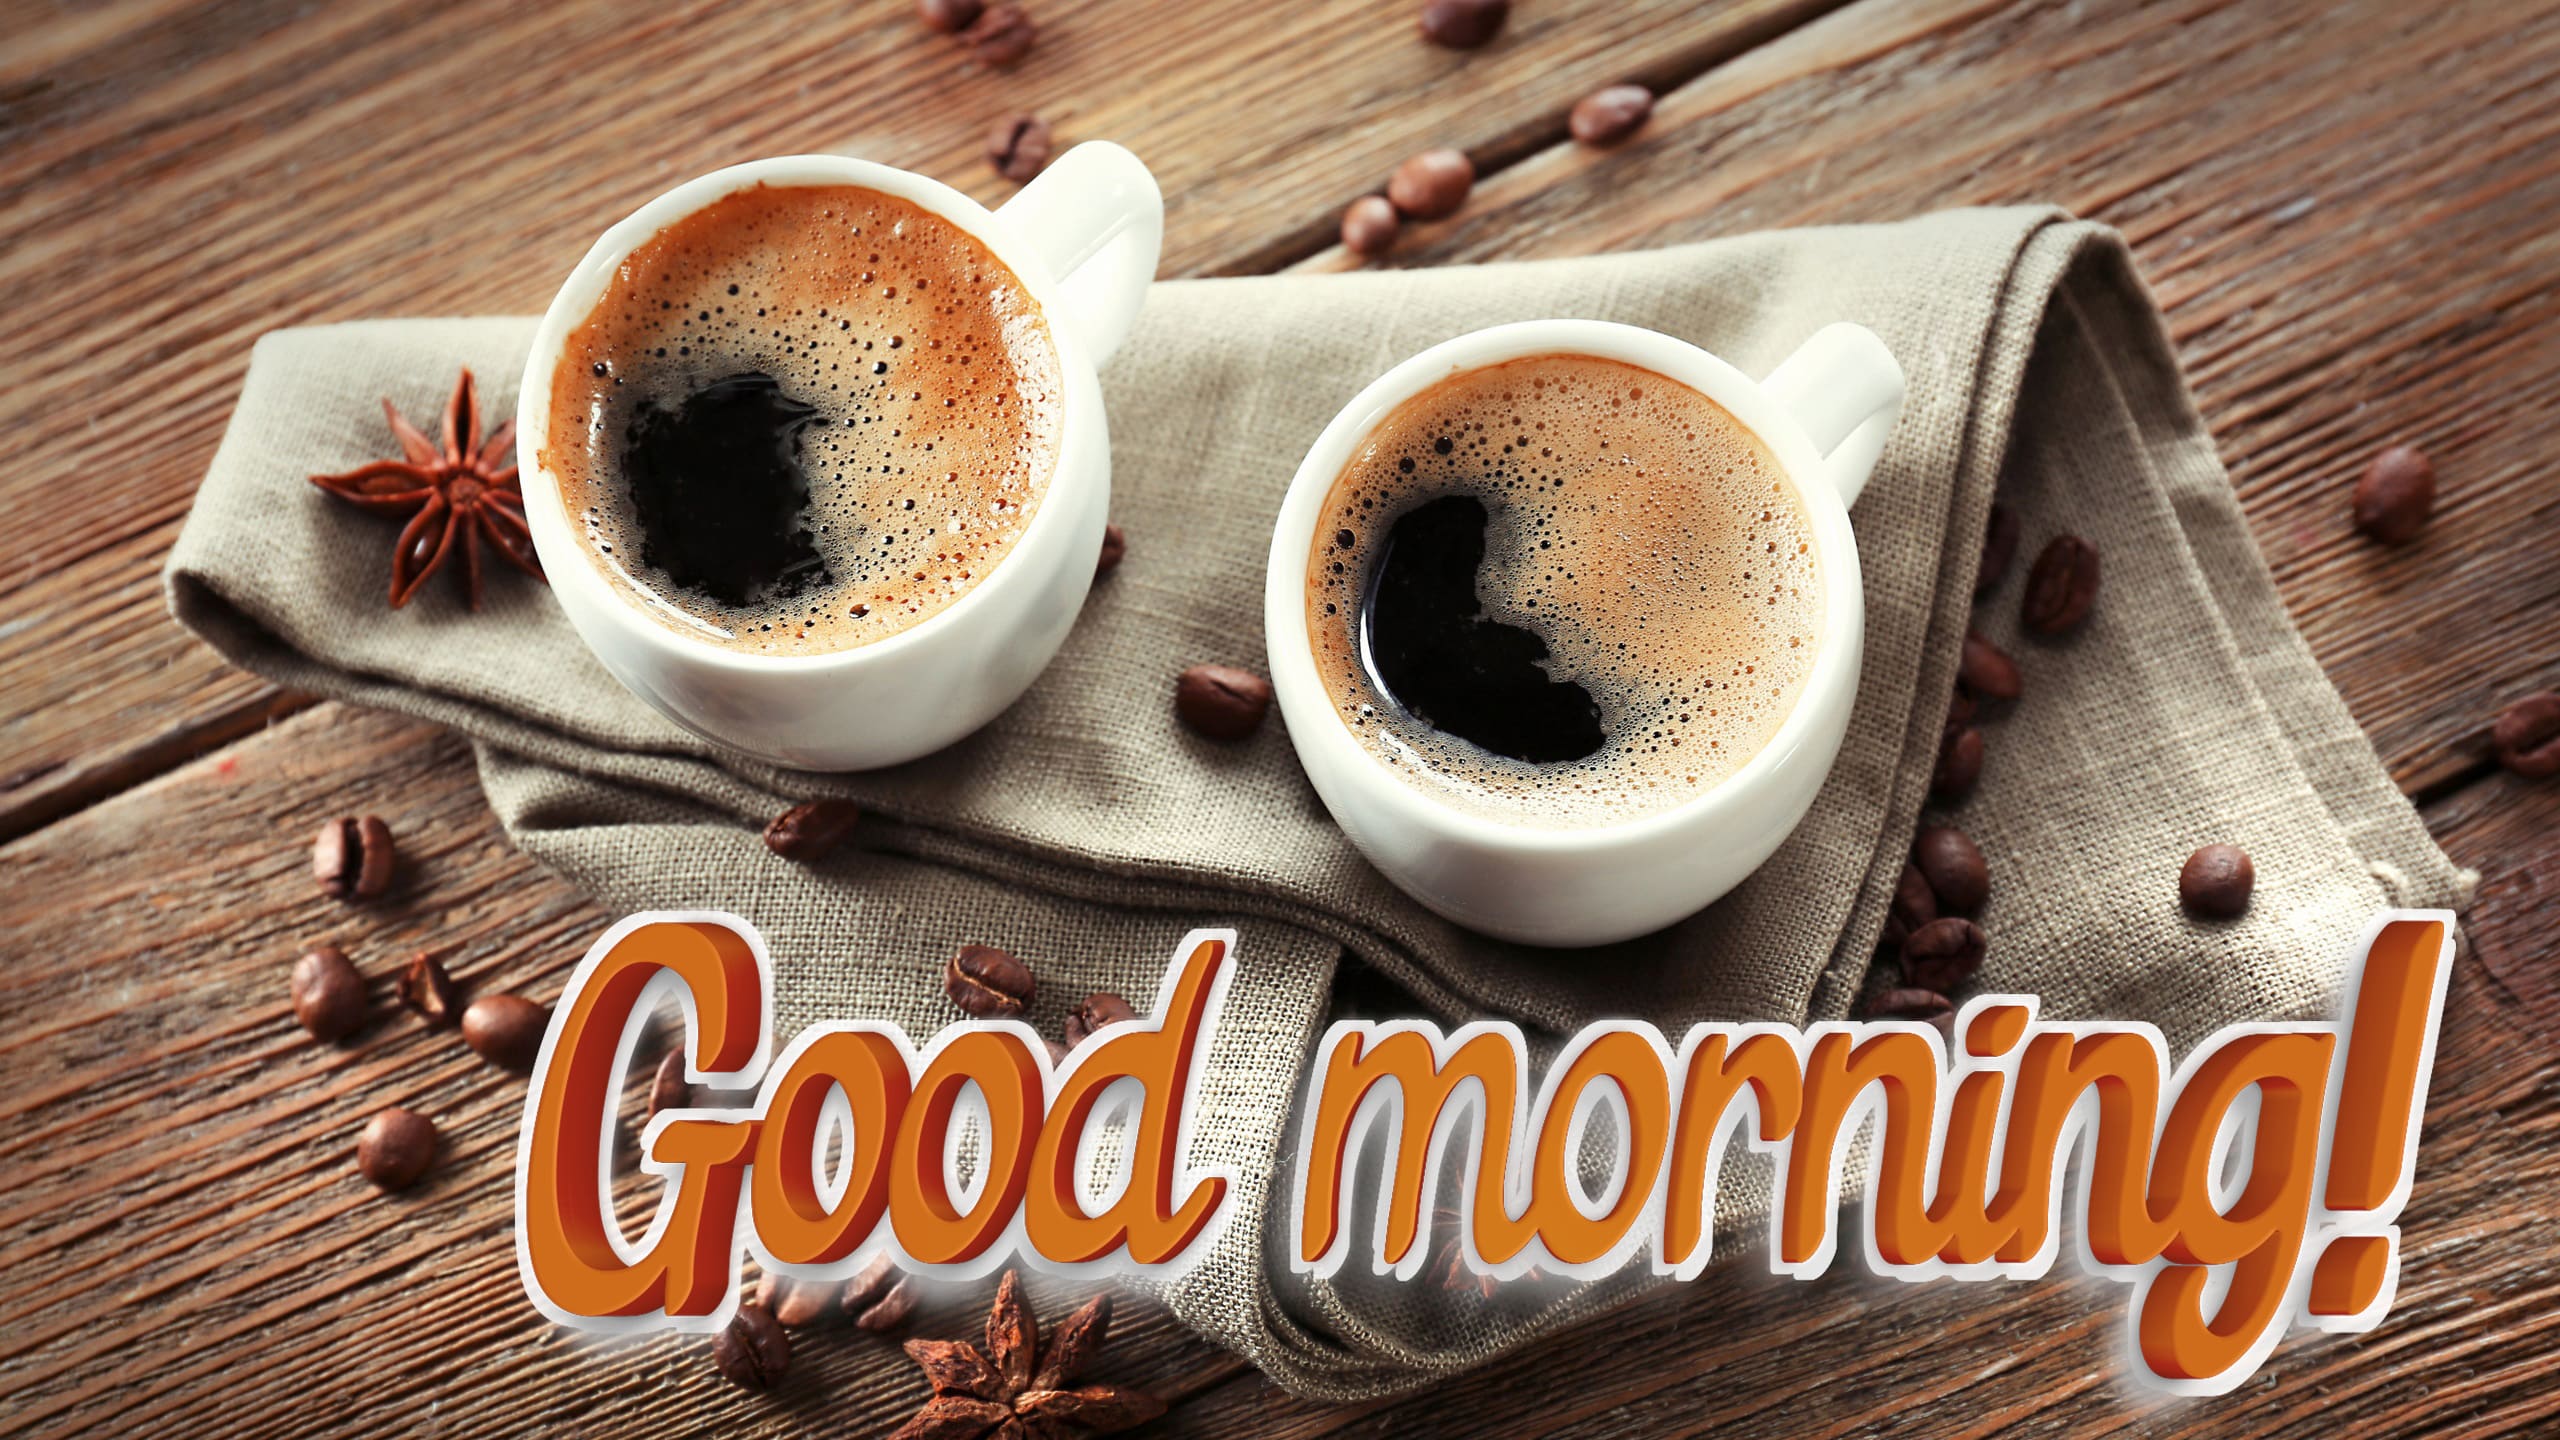 Beautiful Pictures Of Good Morning Wishes - Good Morning 2 Cup Tea - HD Wallpaper 